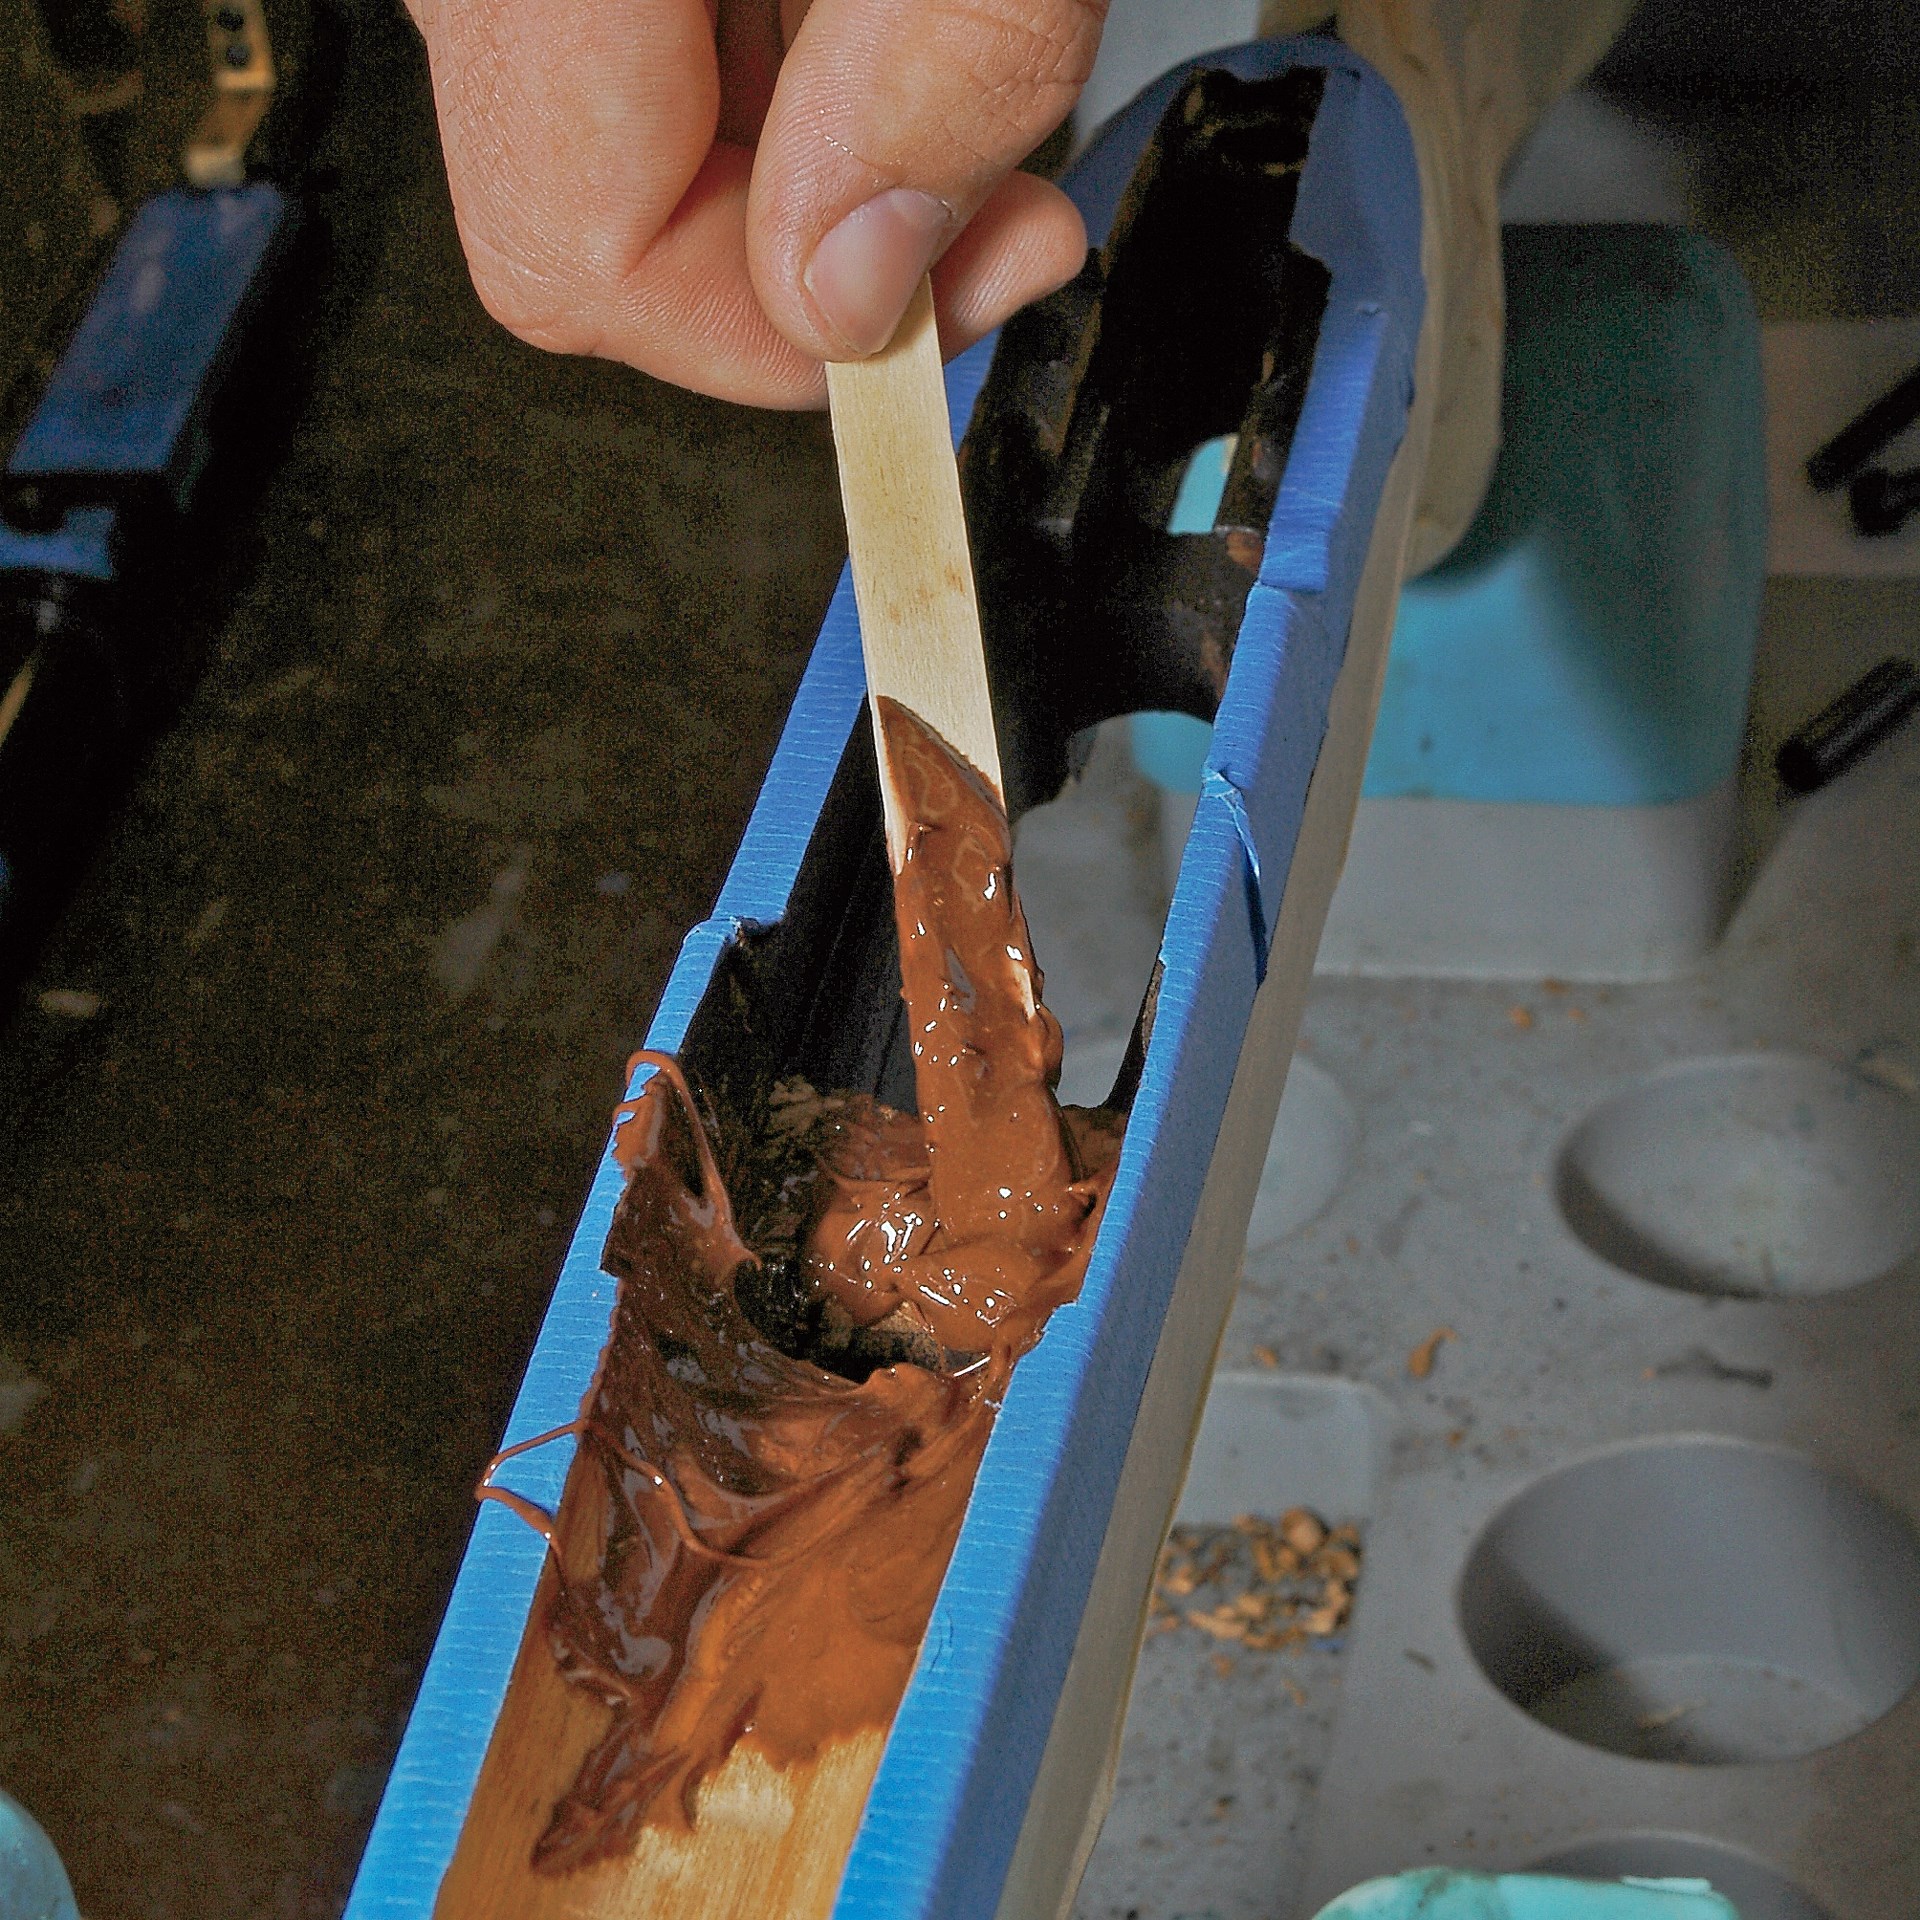 Applying bedding compound with wooden spatula